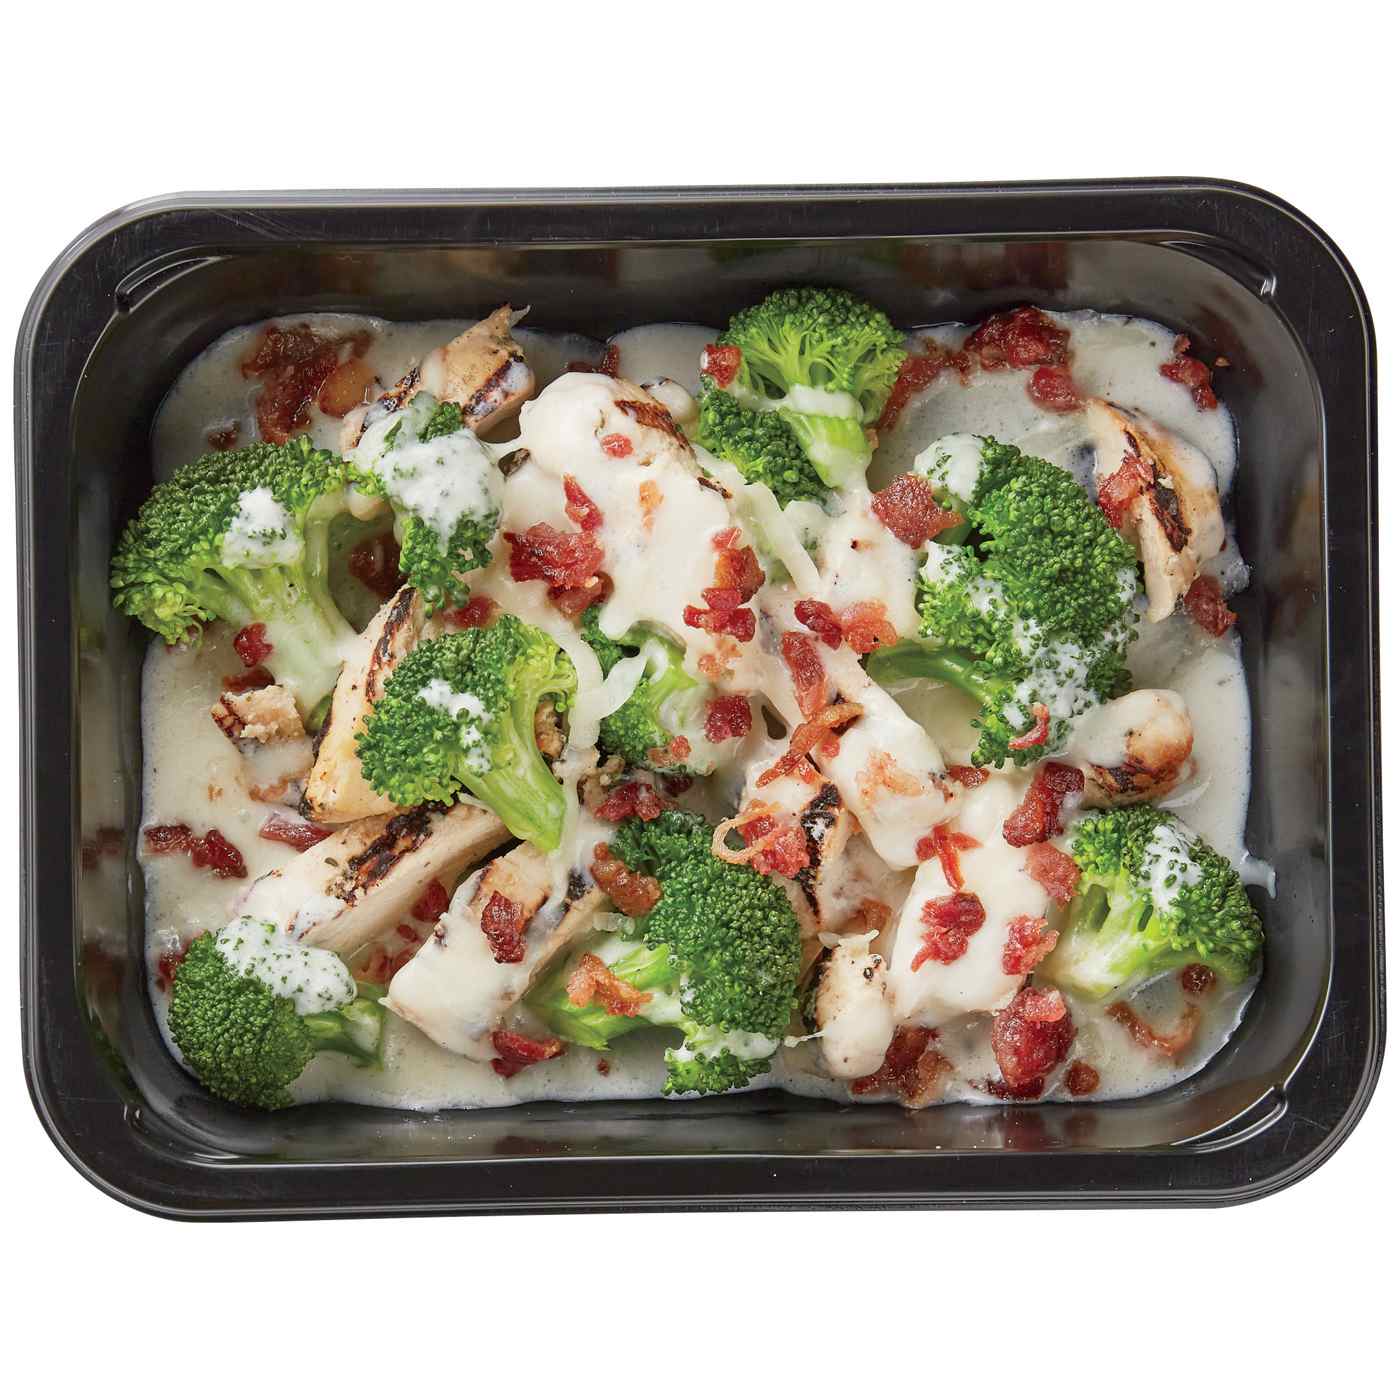 Meal Simple by H-E-B Low-Carb Lifestyle Ranch Chicken & Uncured Bacon; image 1 of 4